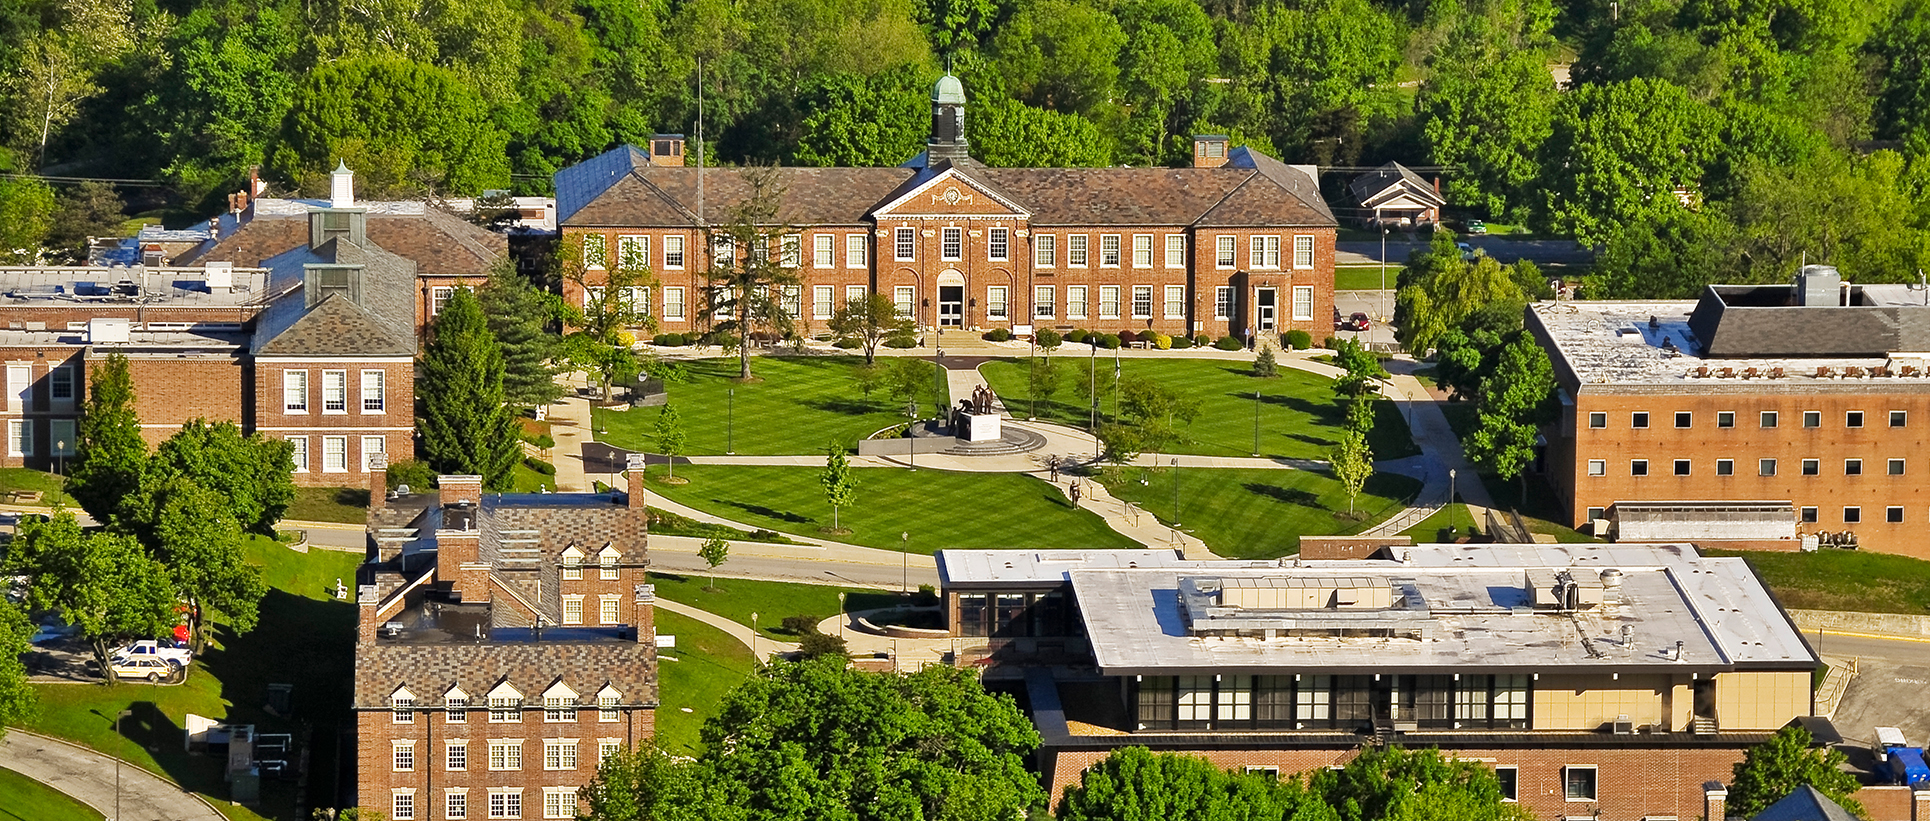 Aerial view of Lincoln University campus featuring historic brick buildings, a central lawn, and surrounding green trees.